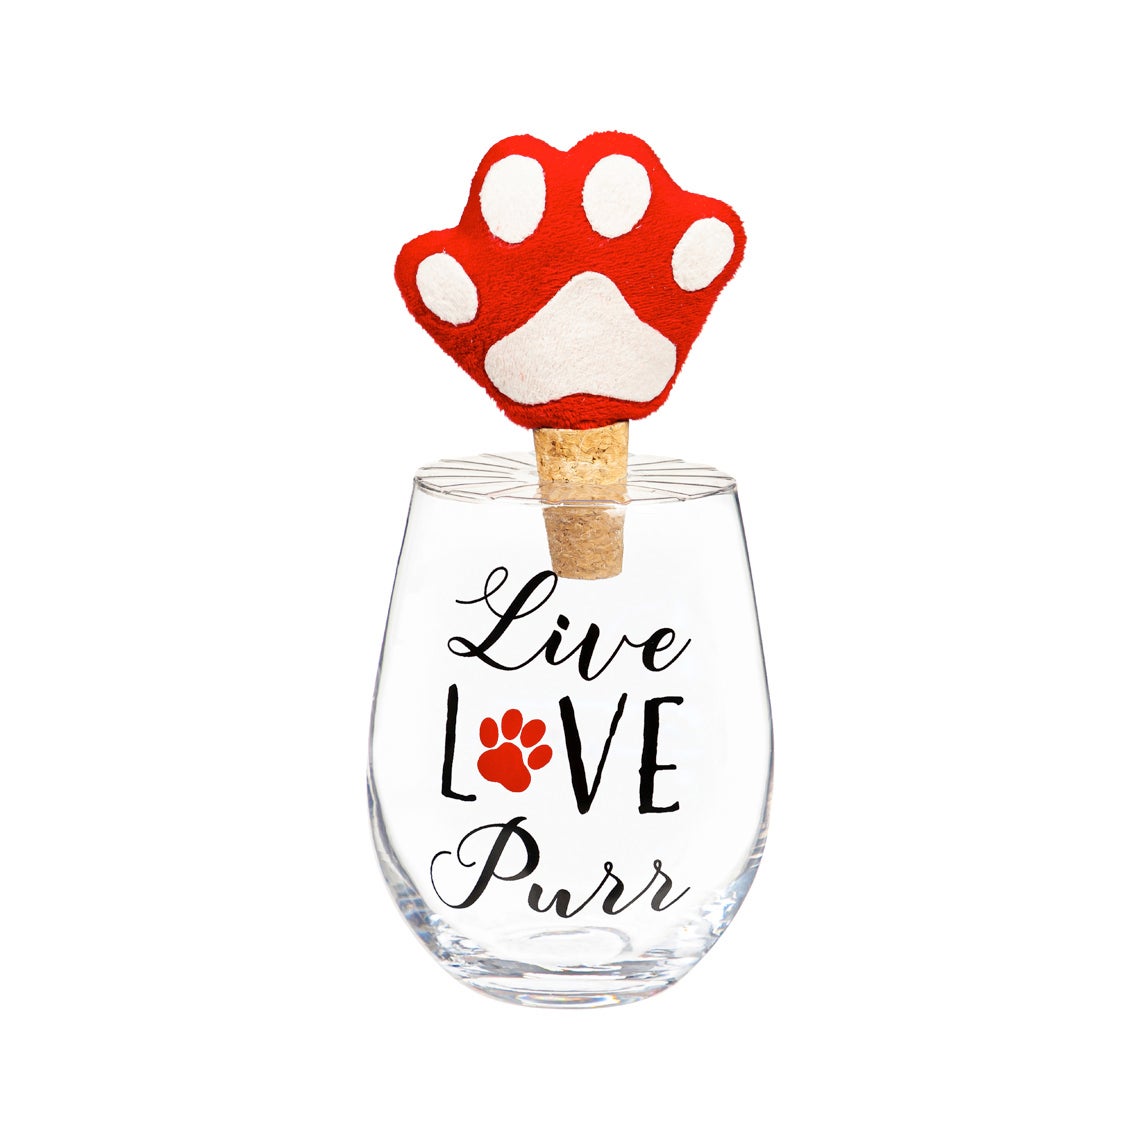 Live, Love, Purr Stemless Glass with Paw Print Stopper Gift Set, 17 oz.